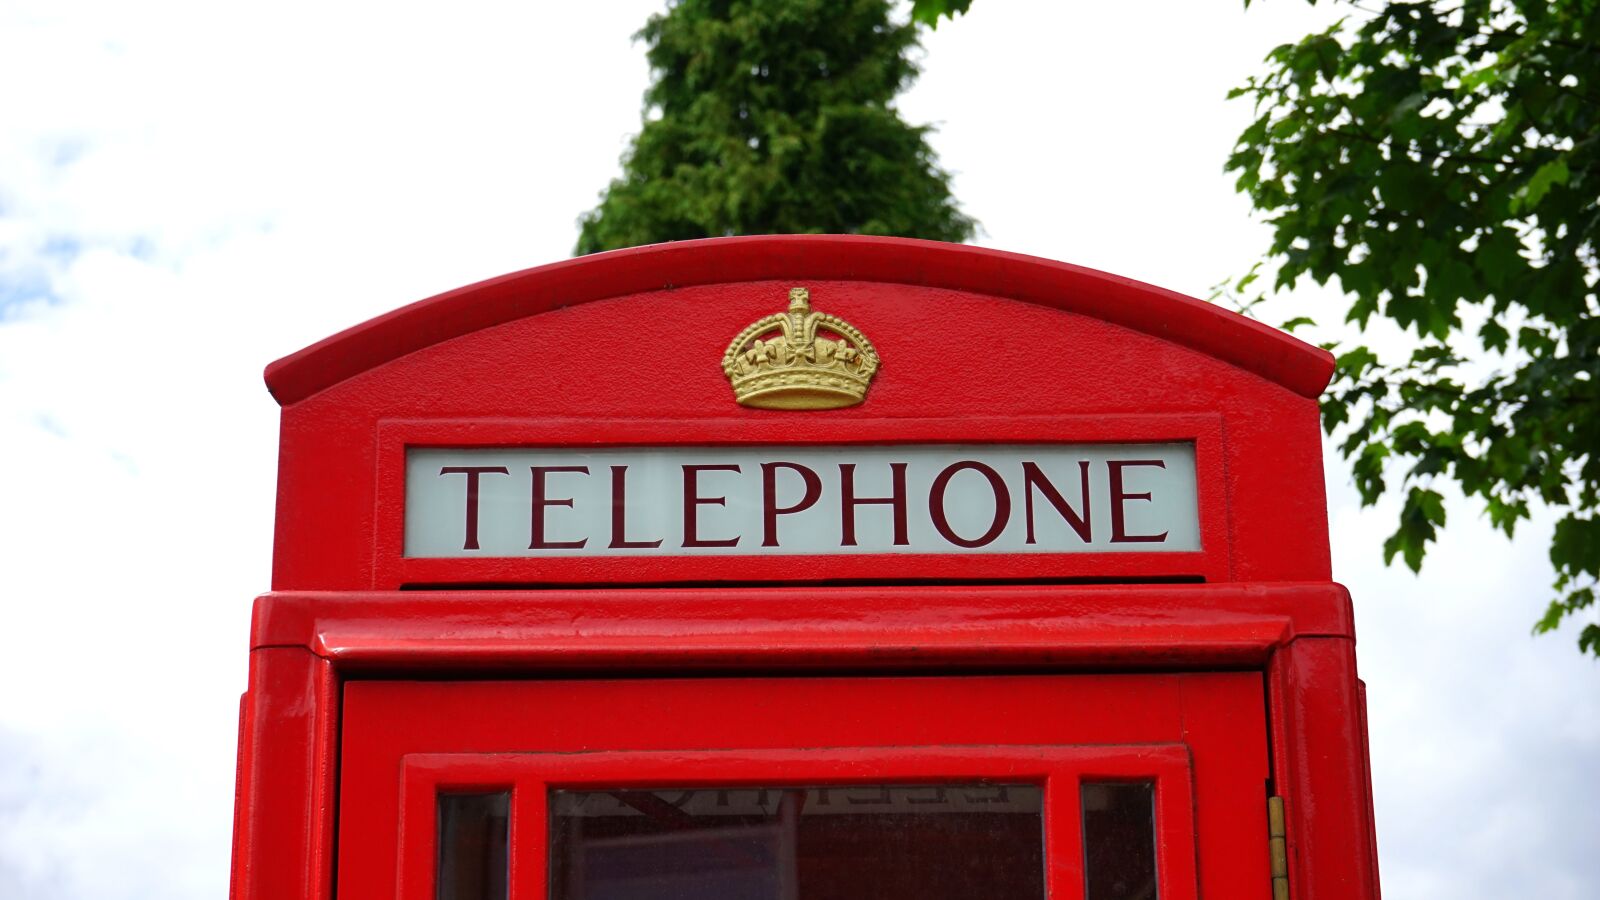 Sony a7 sample photo. "British, telephone, red" photography